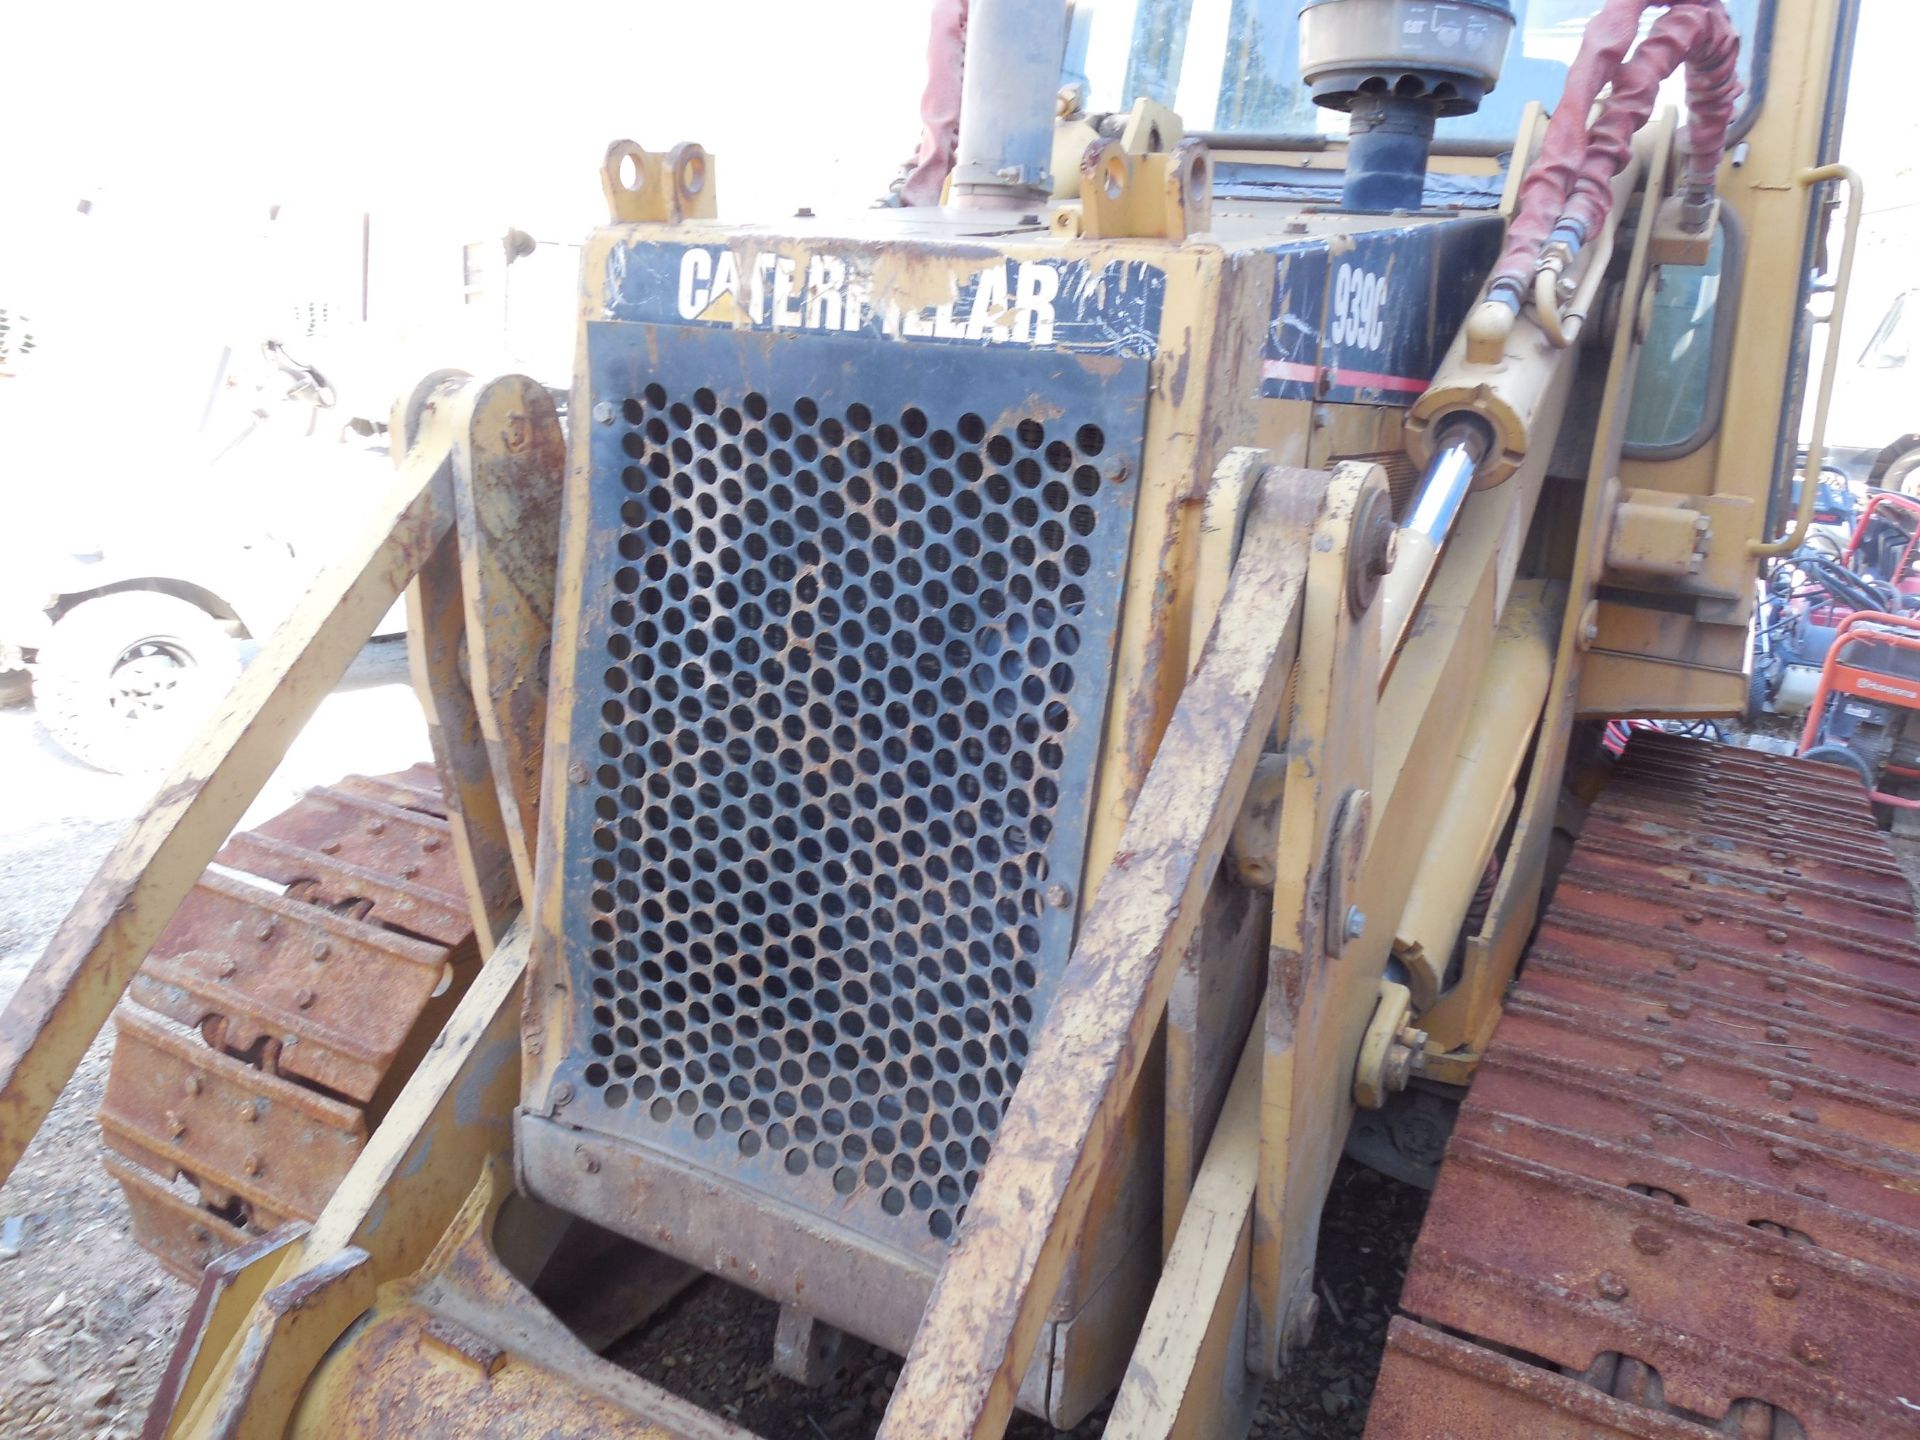 Caterpillar Model 939C Crawler Type Loader - 2022 Hours. **See Auctioneers Note** - Image 3 of 15